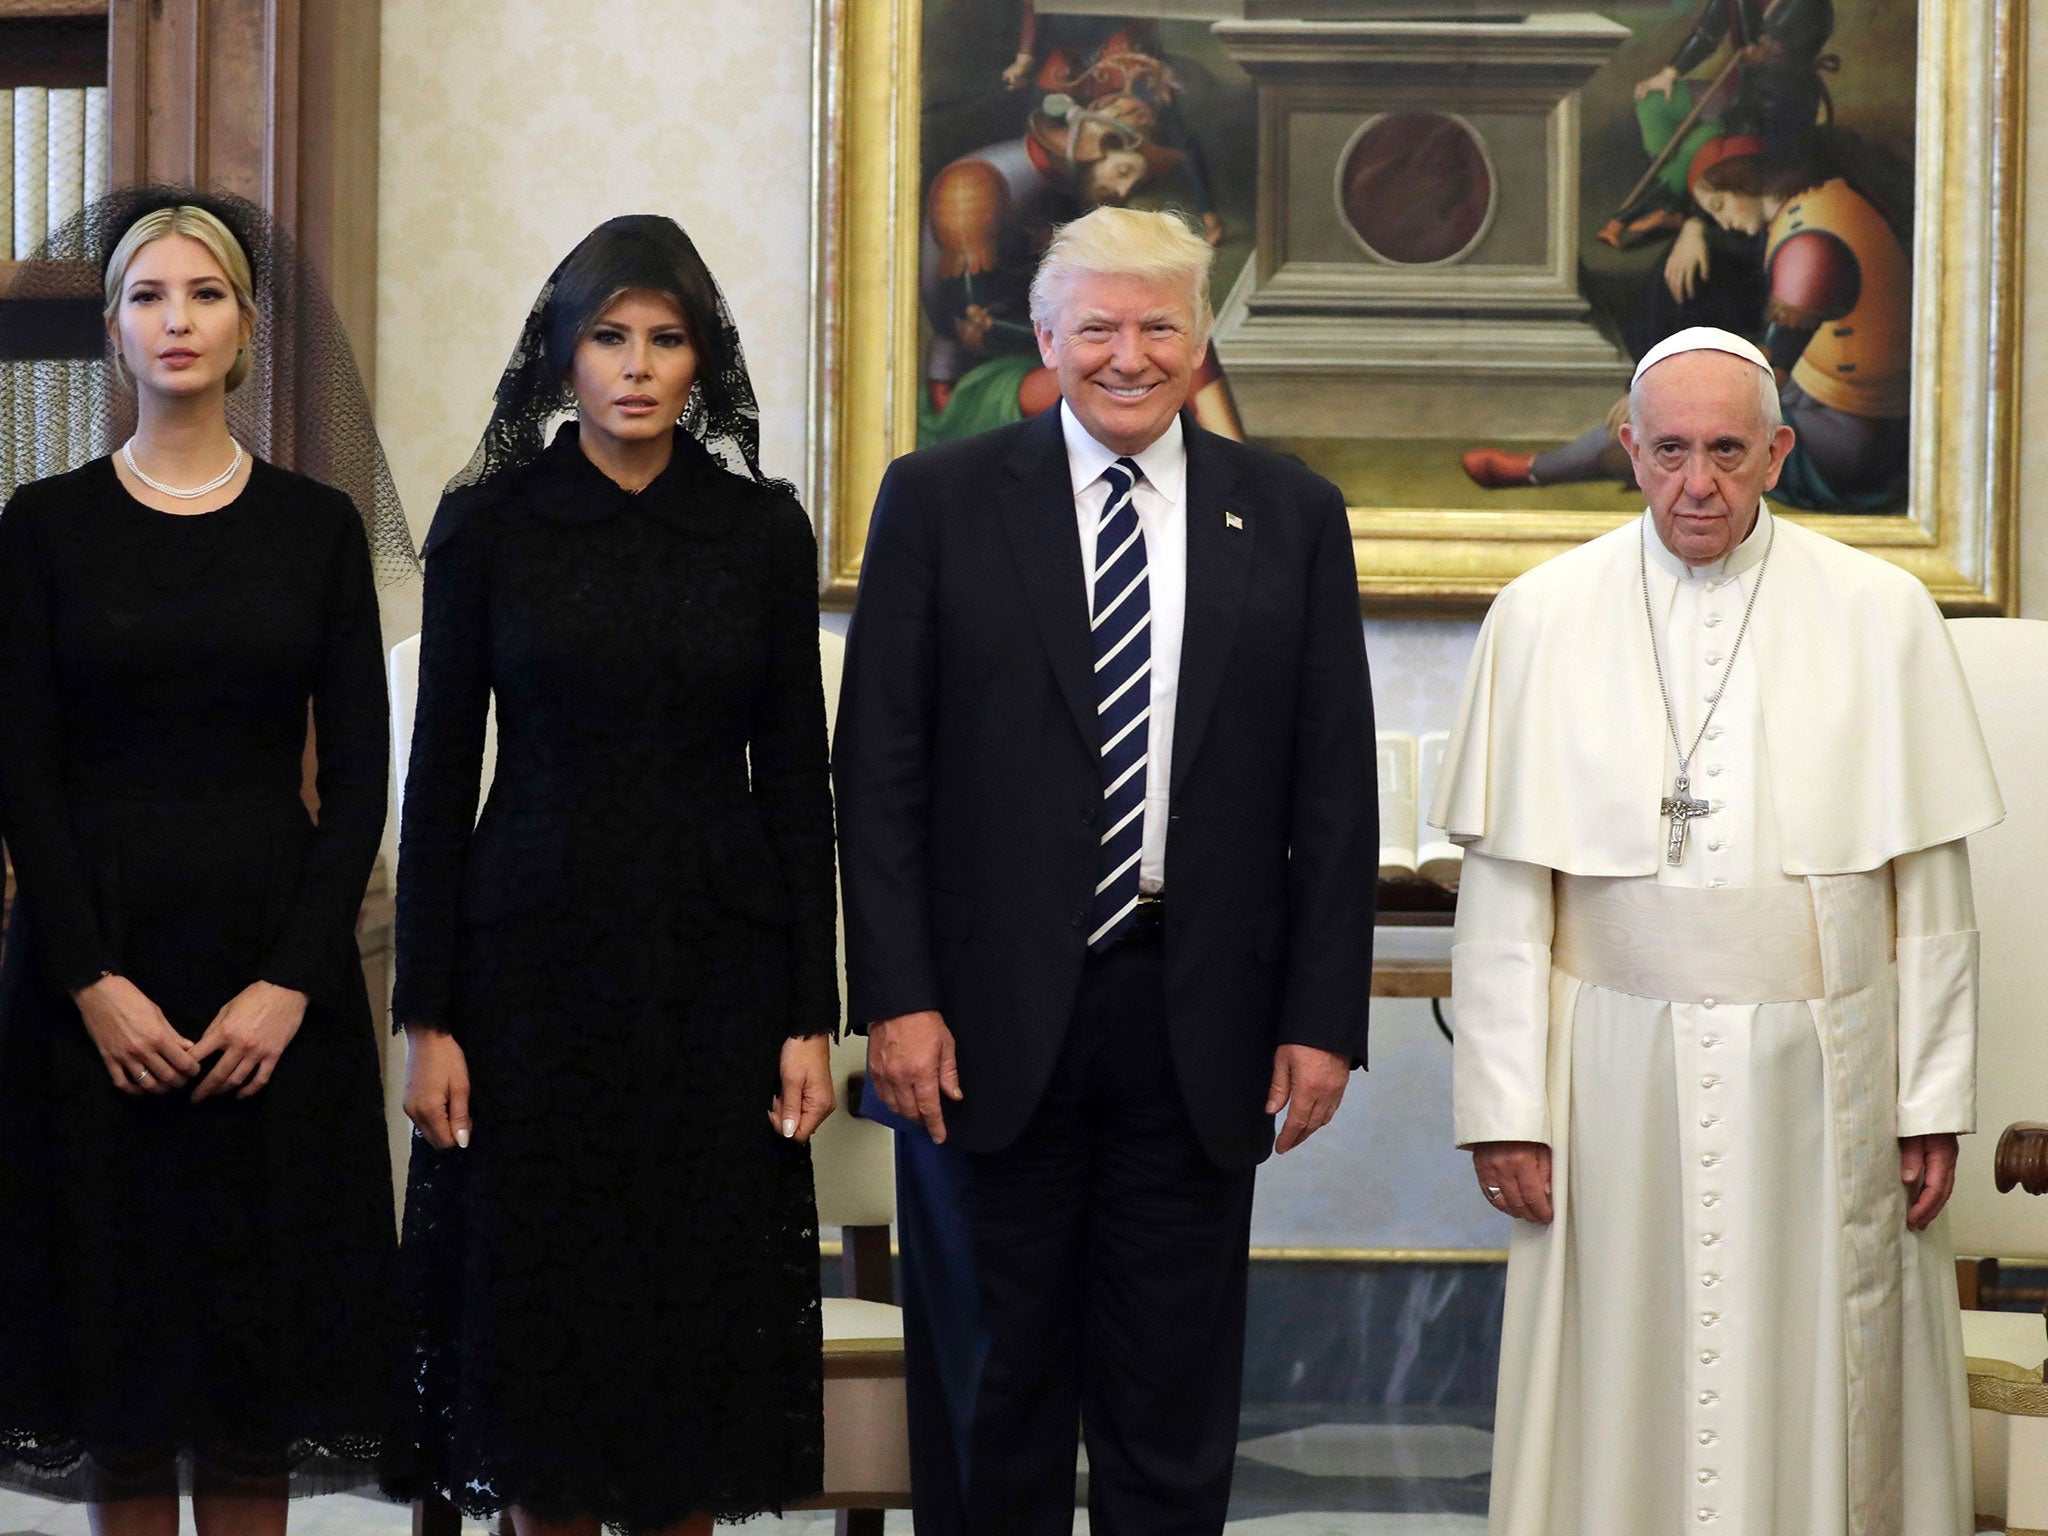 Pope Francis poses with US President Donald Trump, First Lady Melania Trump and the daughter of Ivanka Trump at the end of a private audience at the Vatican